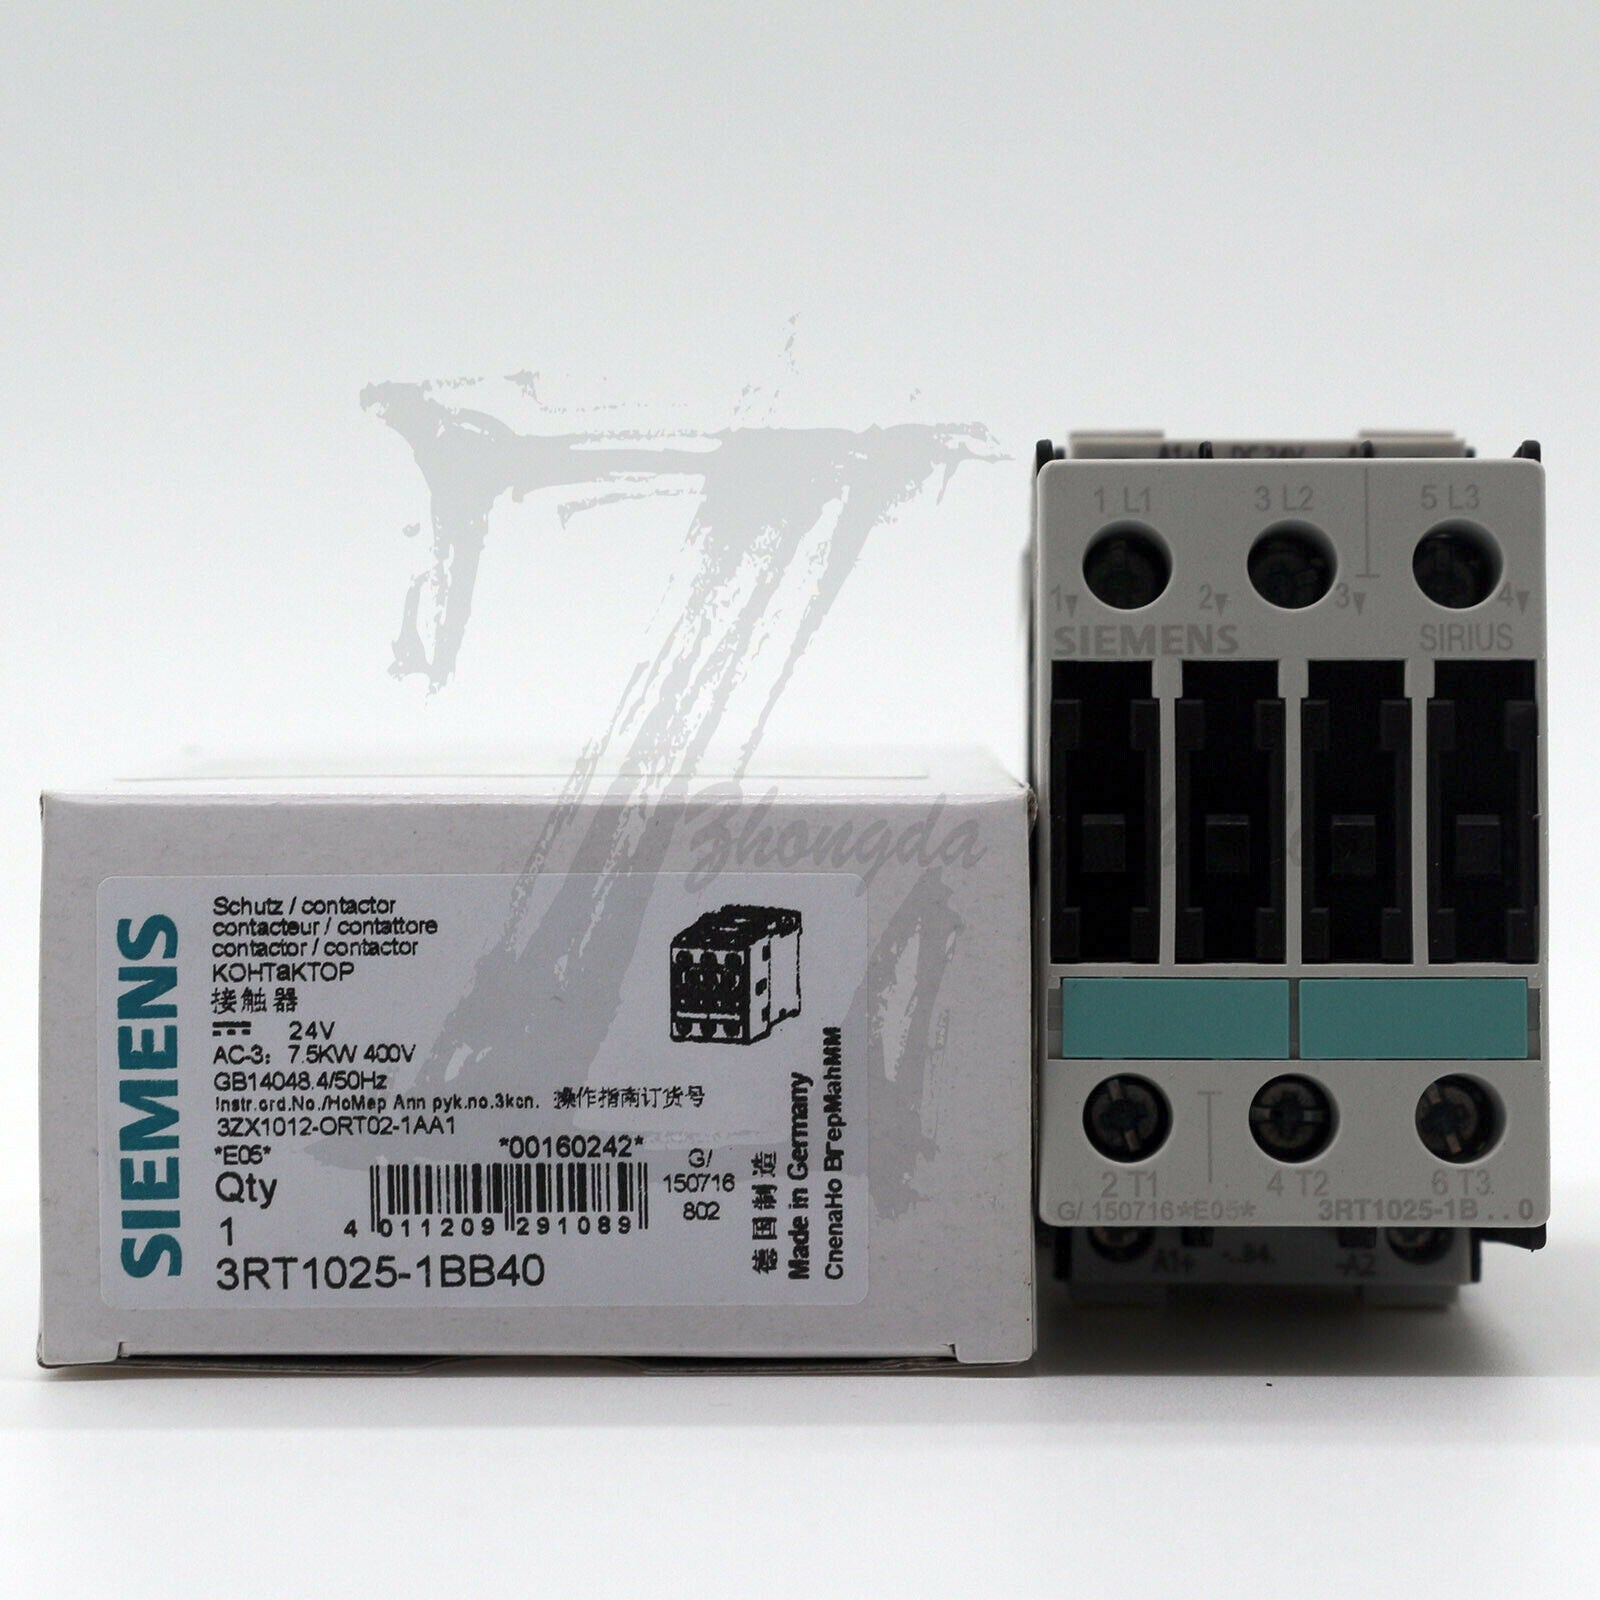 1PC Siemens Contactor 3RT1025-1BB40 (3RT10251BB40) New In Box fast delivery KOEED 1, 90%, import_2020_10_10_031751, Other, Siemens